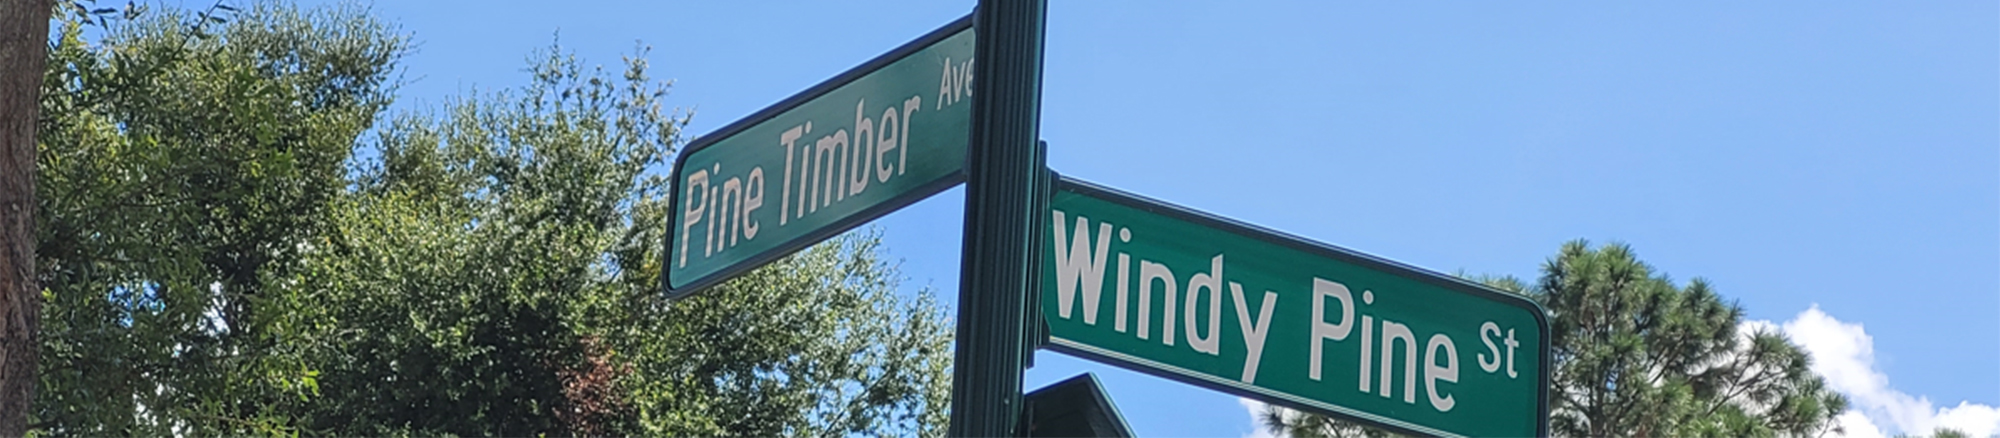 pine-timber-winy-pine-sign_banner